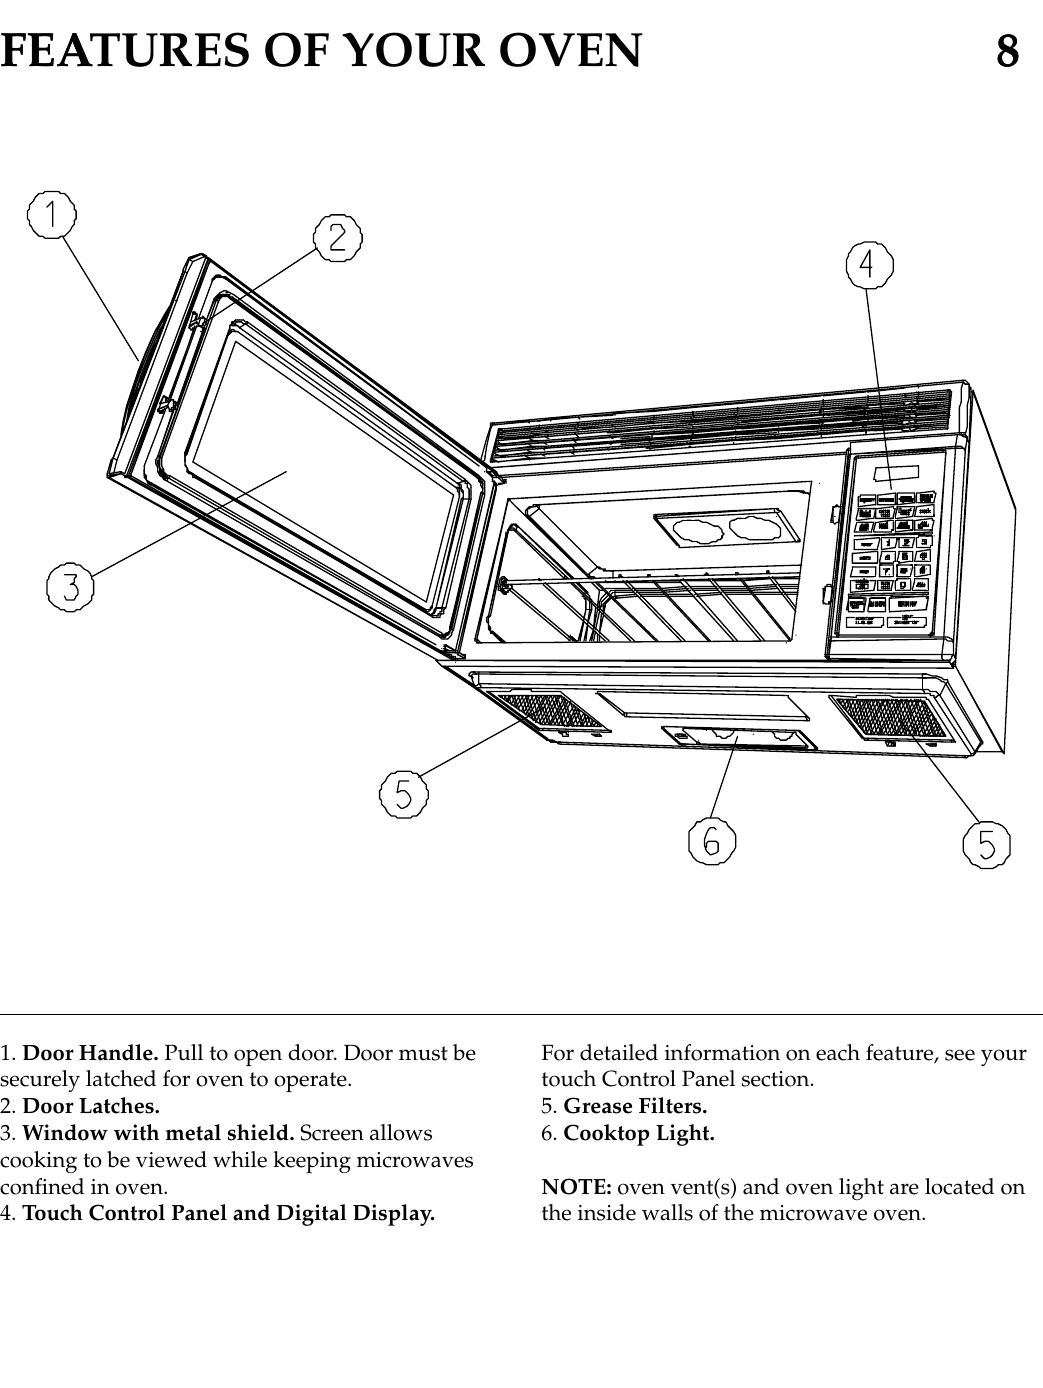 FEA 8FEATURES OF YOUR OVEN 81. Door Handle. Pull to open door. Door must besecurely latched for oven to operate.2. Door Latches.3. Window with metal shield. Screen allowscooking to be viewed while keeping microwavesconfined in oven.4. Touch Control Panel and Digital Display.For detailed information on each feature, see yourtouch Control Panel section.5. Grease Filters.6. Cooktop Light.NOTE: oven vent(s) and oven light are located onthe inside walls of the microwave oven.